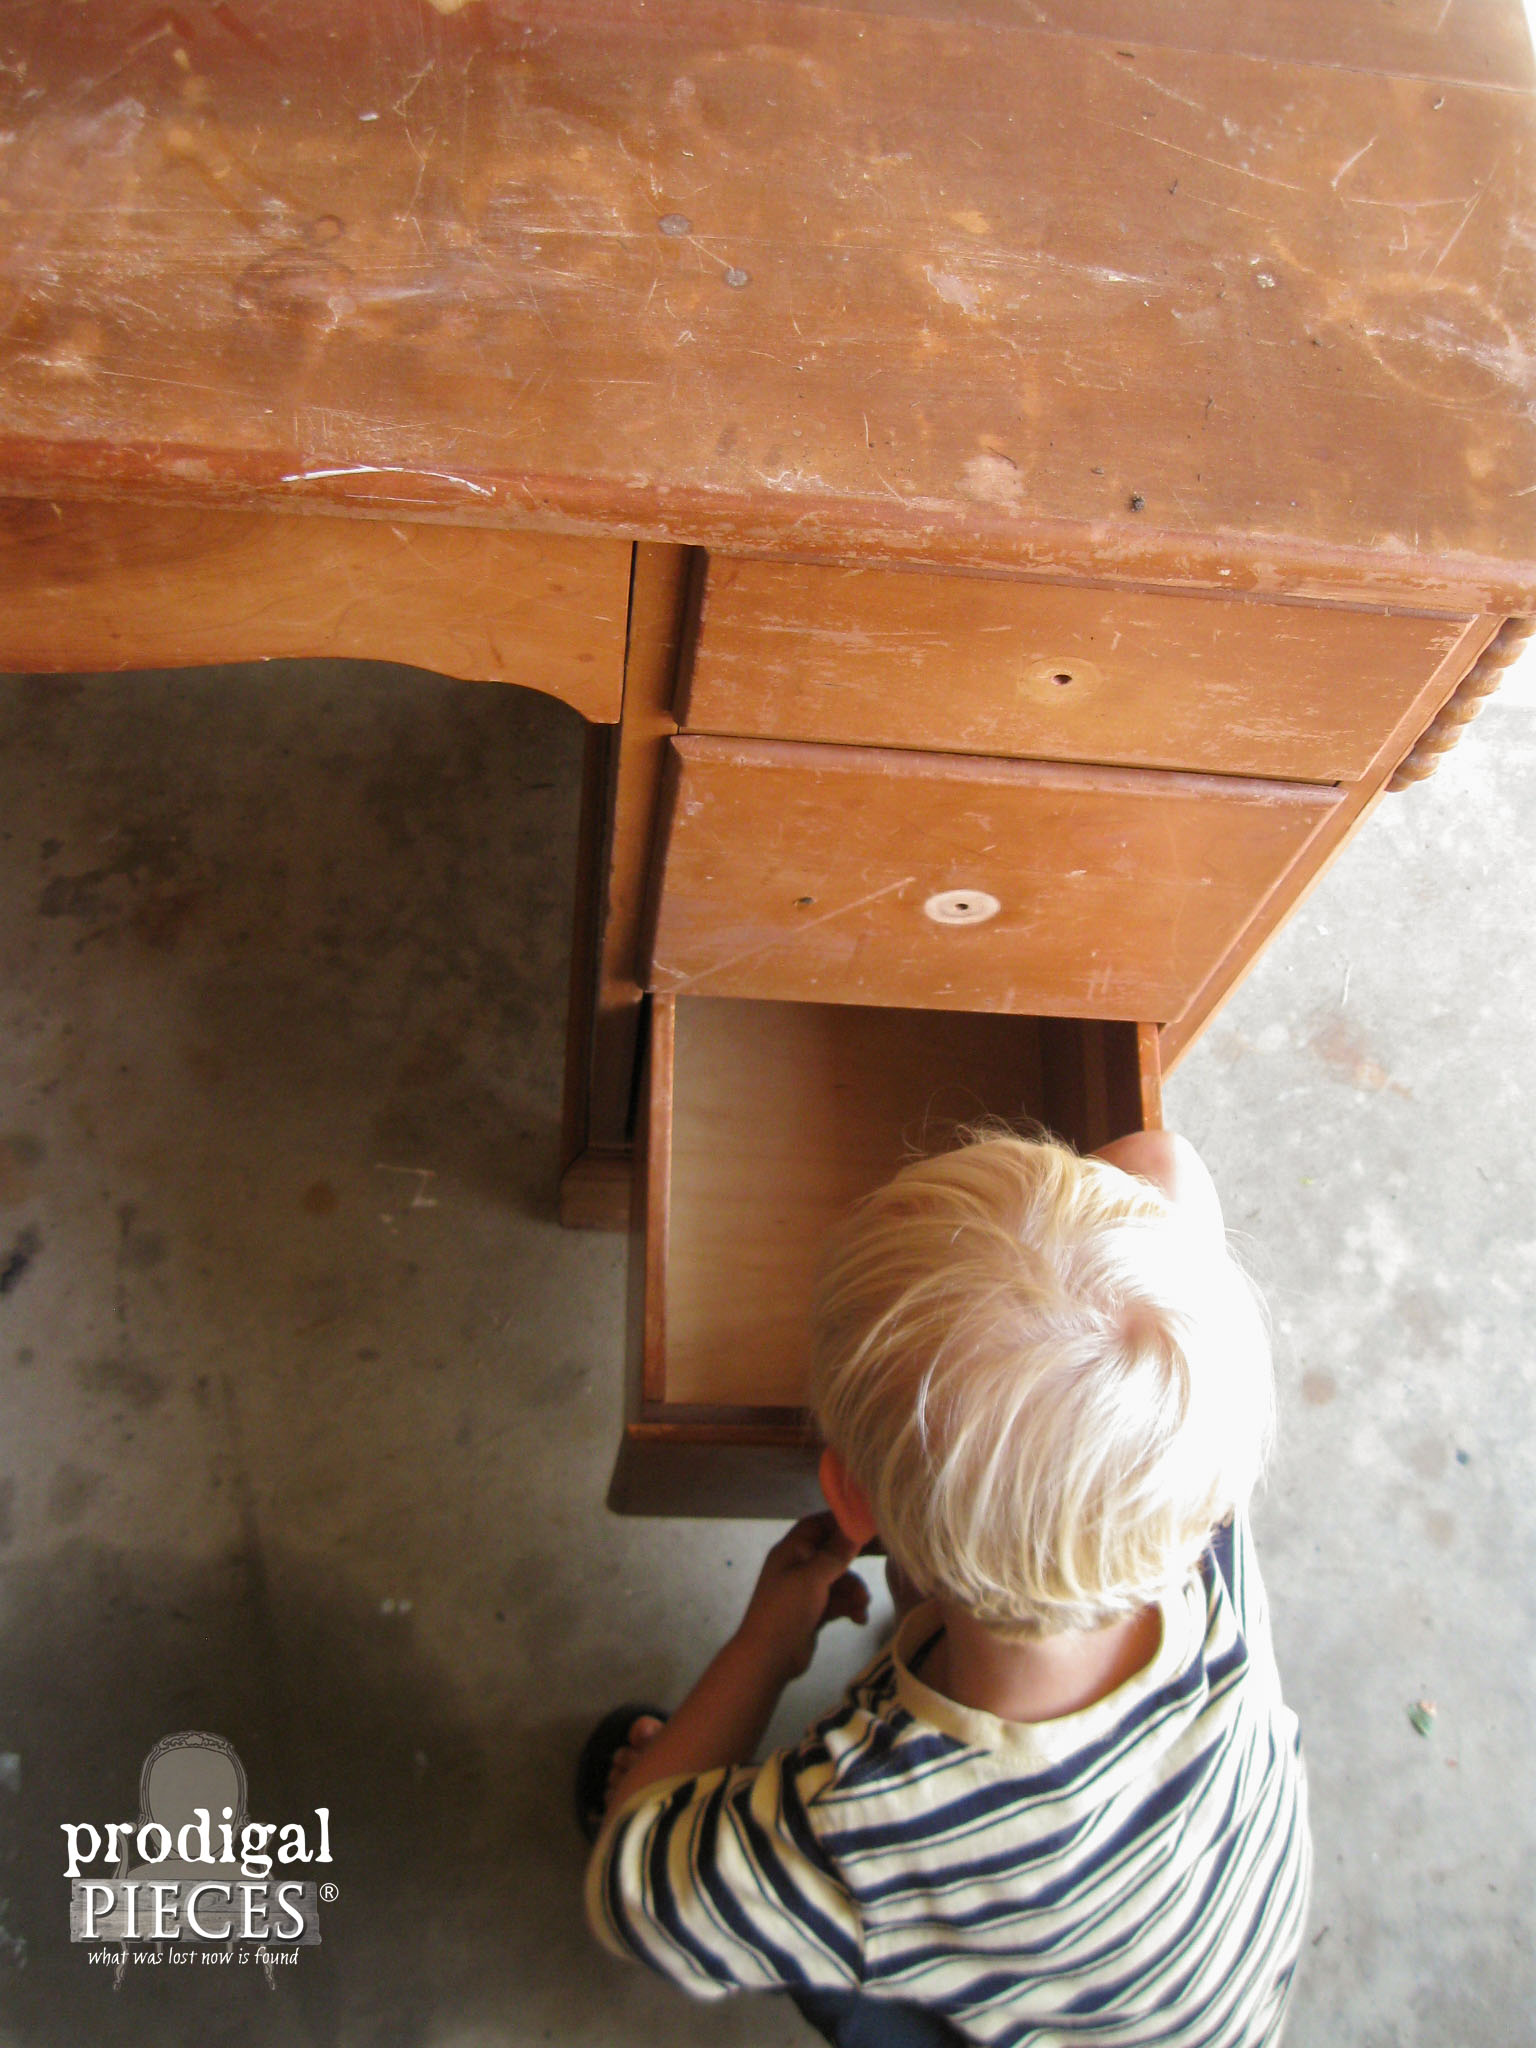 My Son Helping Remove Drawer Pulls | Prodigal Pieces | www.prodigalpieces.com